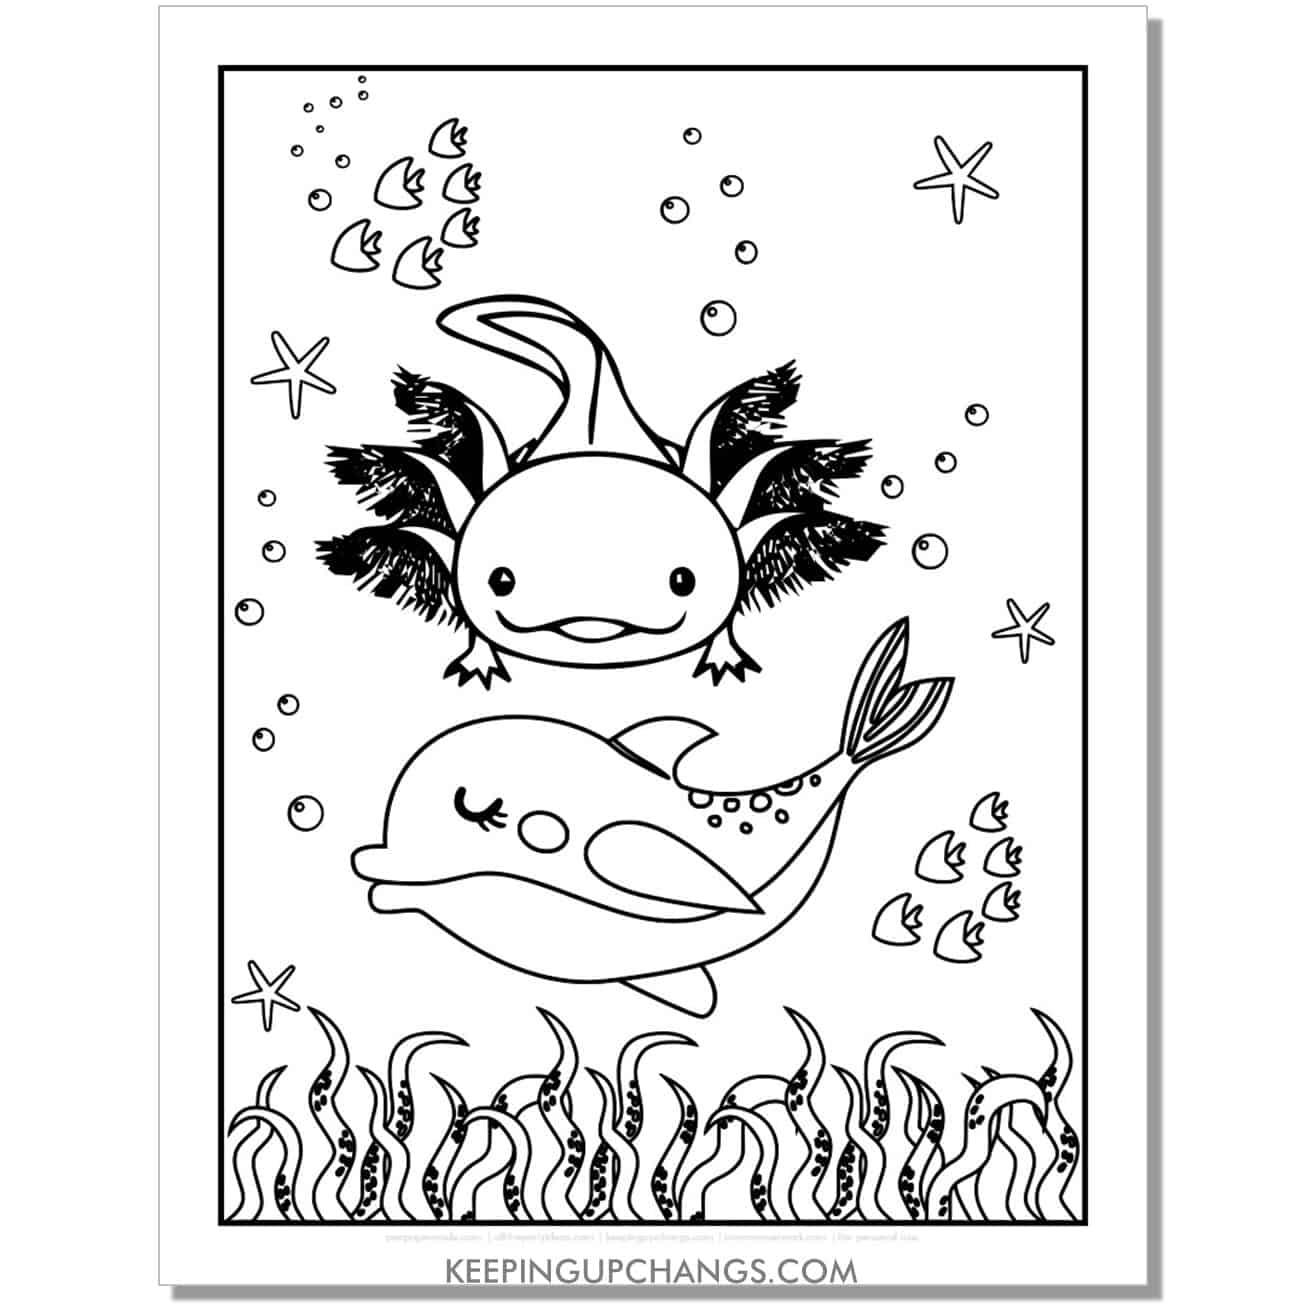 free swimming axolotl coloring page, colouring sheet with dolphin, seaweed.